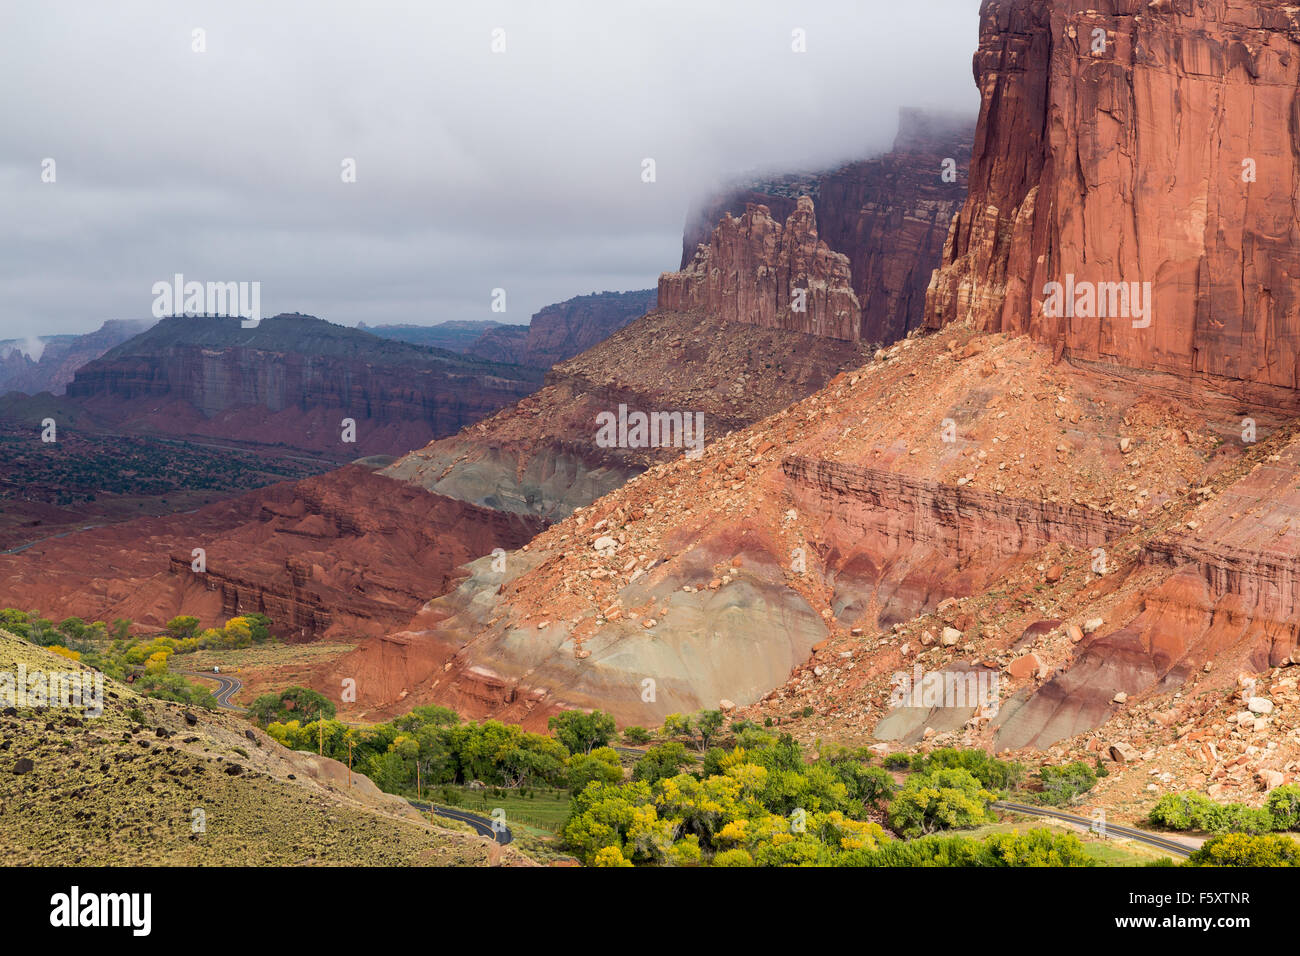 Stormy weather gathering above the Waterpocket Fold, Capitol Reef National Park, Utah Stock Photo